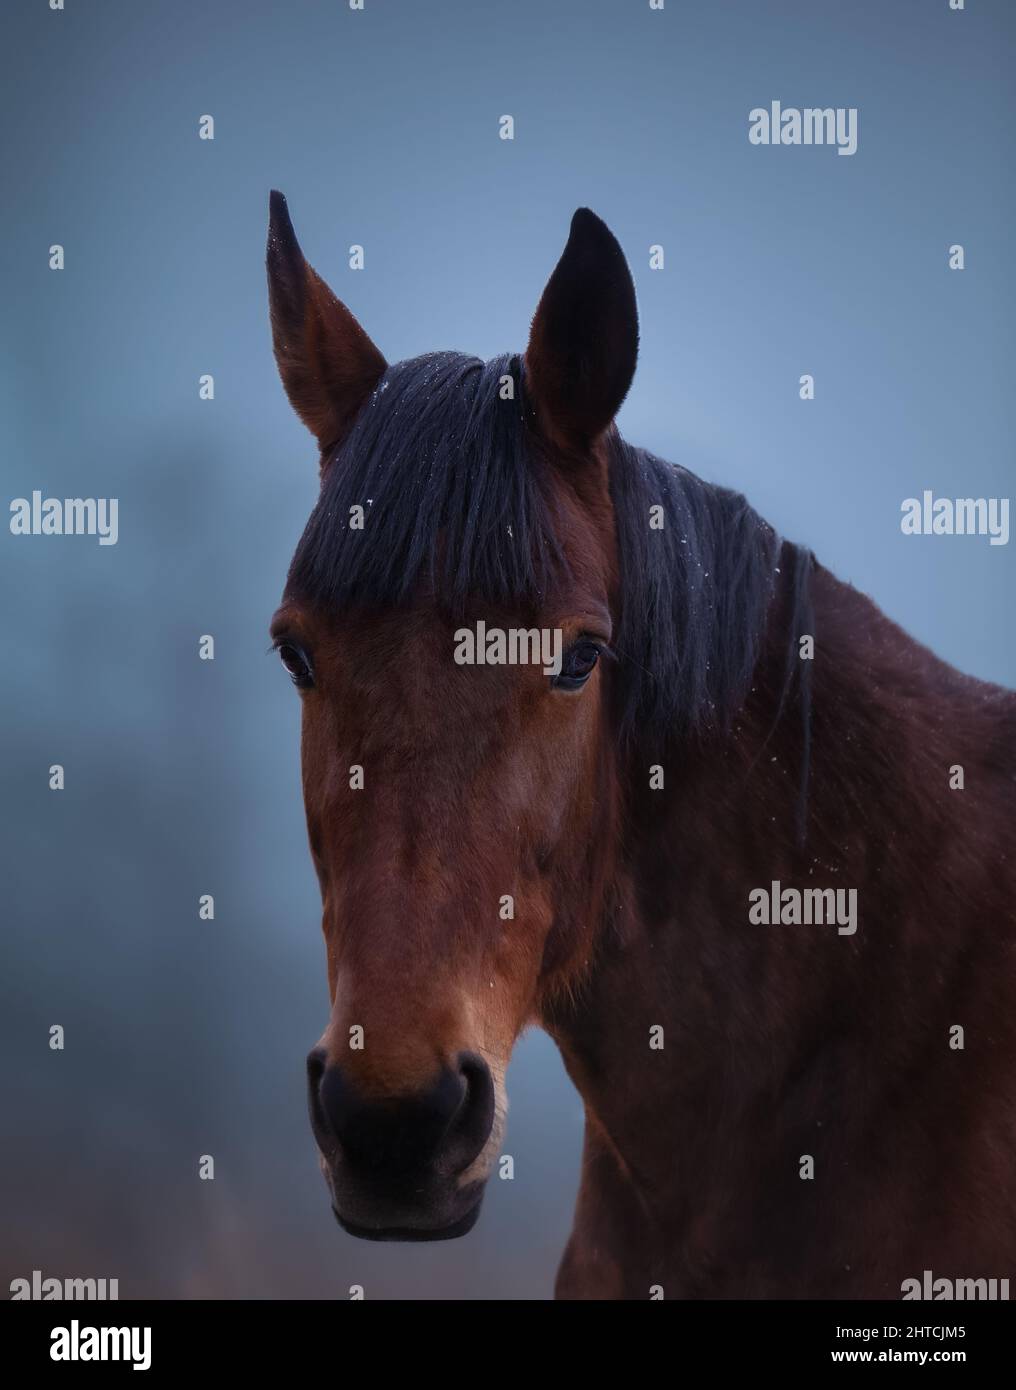 Closeup of a horse. Foggy winter landscape in the background. Stock Photo